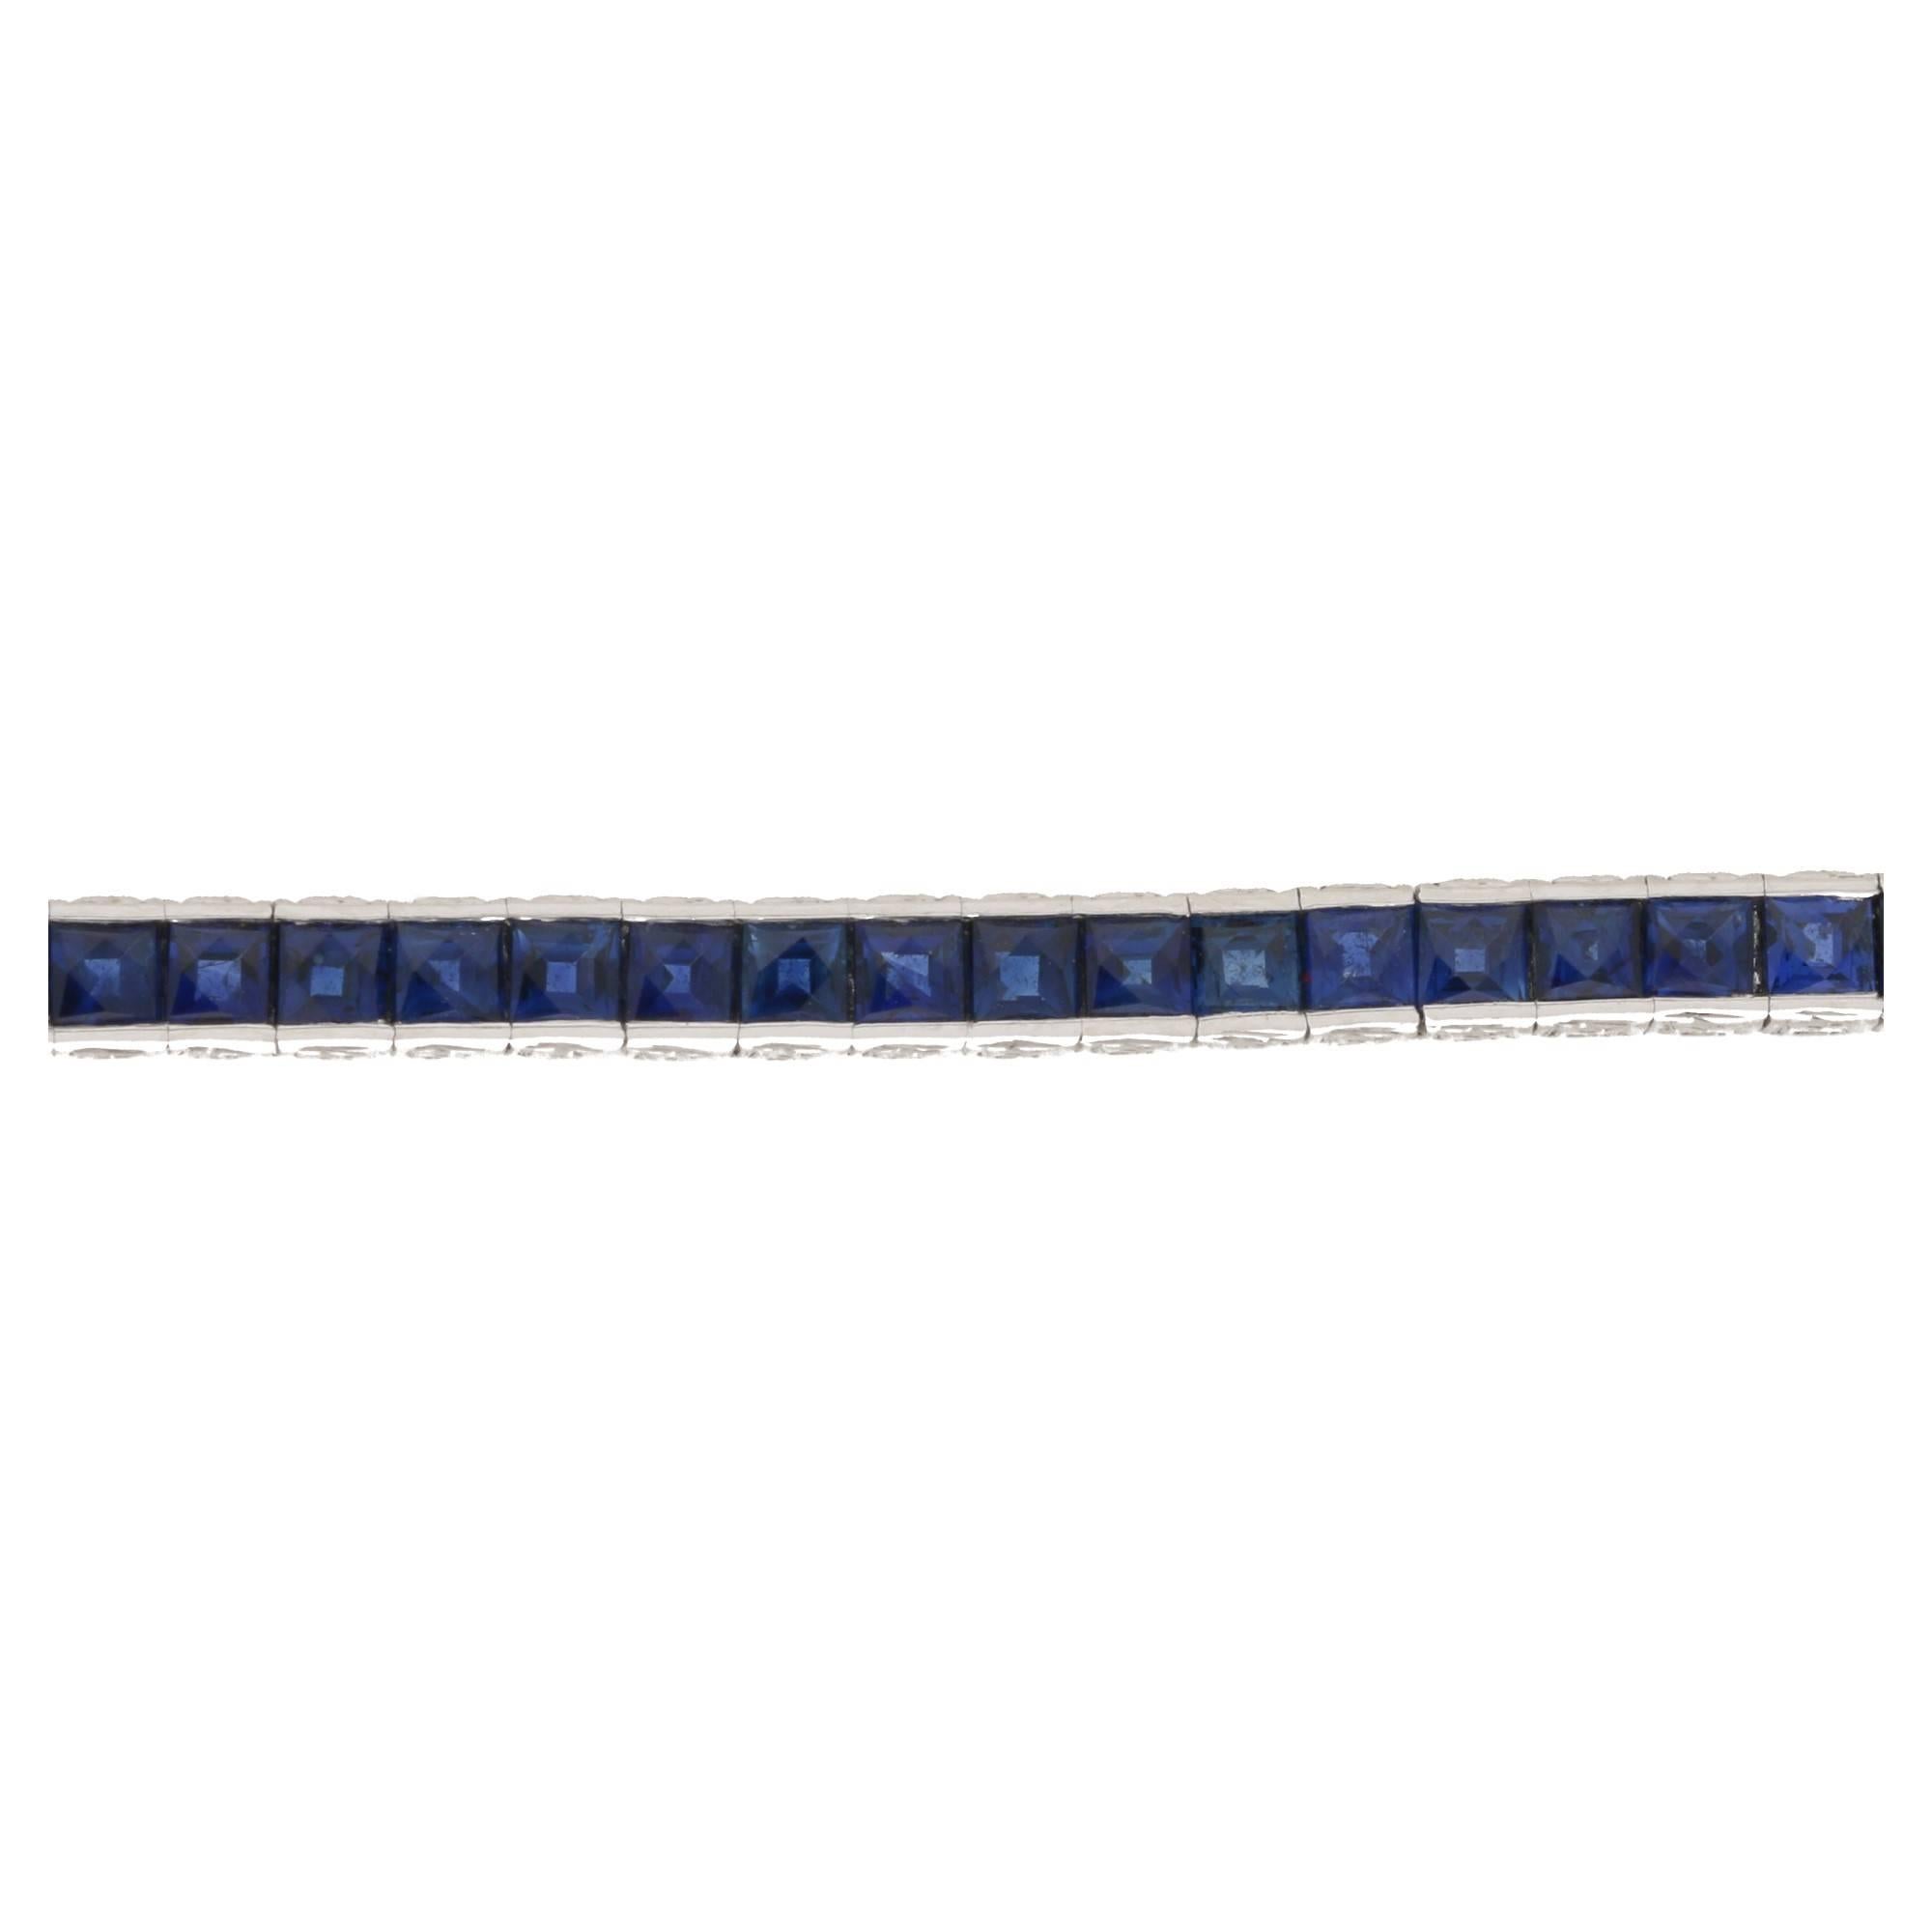 A stunning platinum sapphire line bracelet, featuring seventy-five vivid-blue french cut sapphires each set in a two bar setting individually hinged to the next sapphire creating a seamless line of sapphires seemingly invisibly set with beautiful